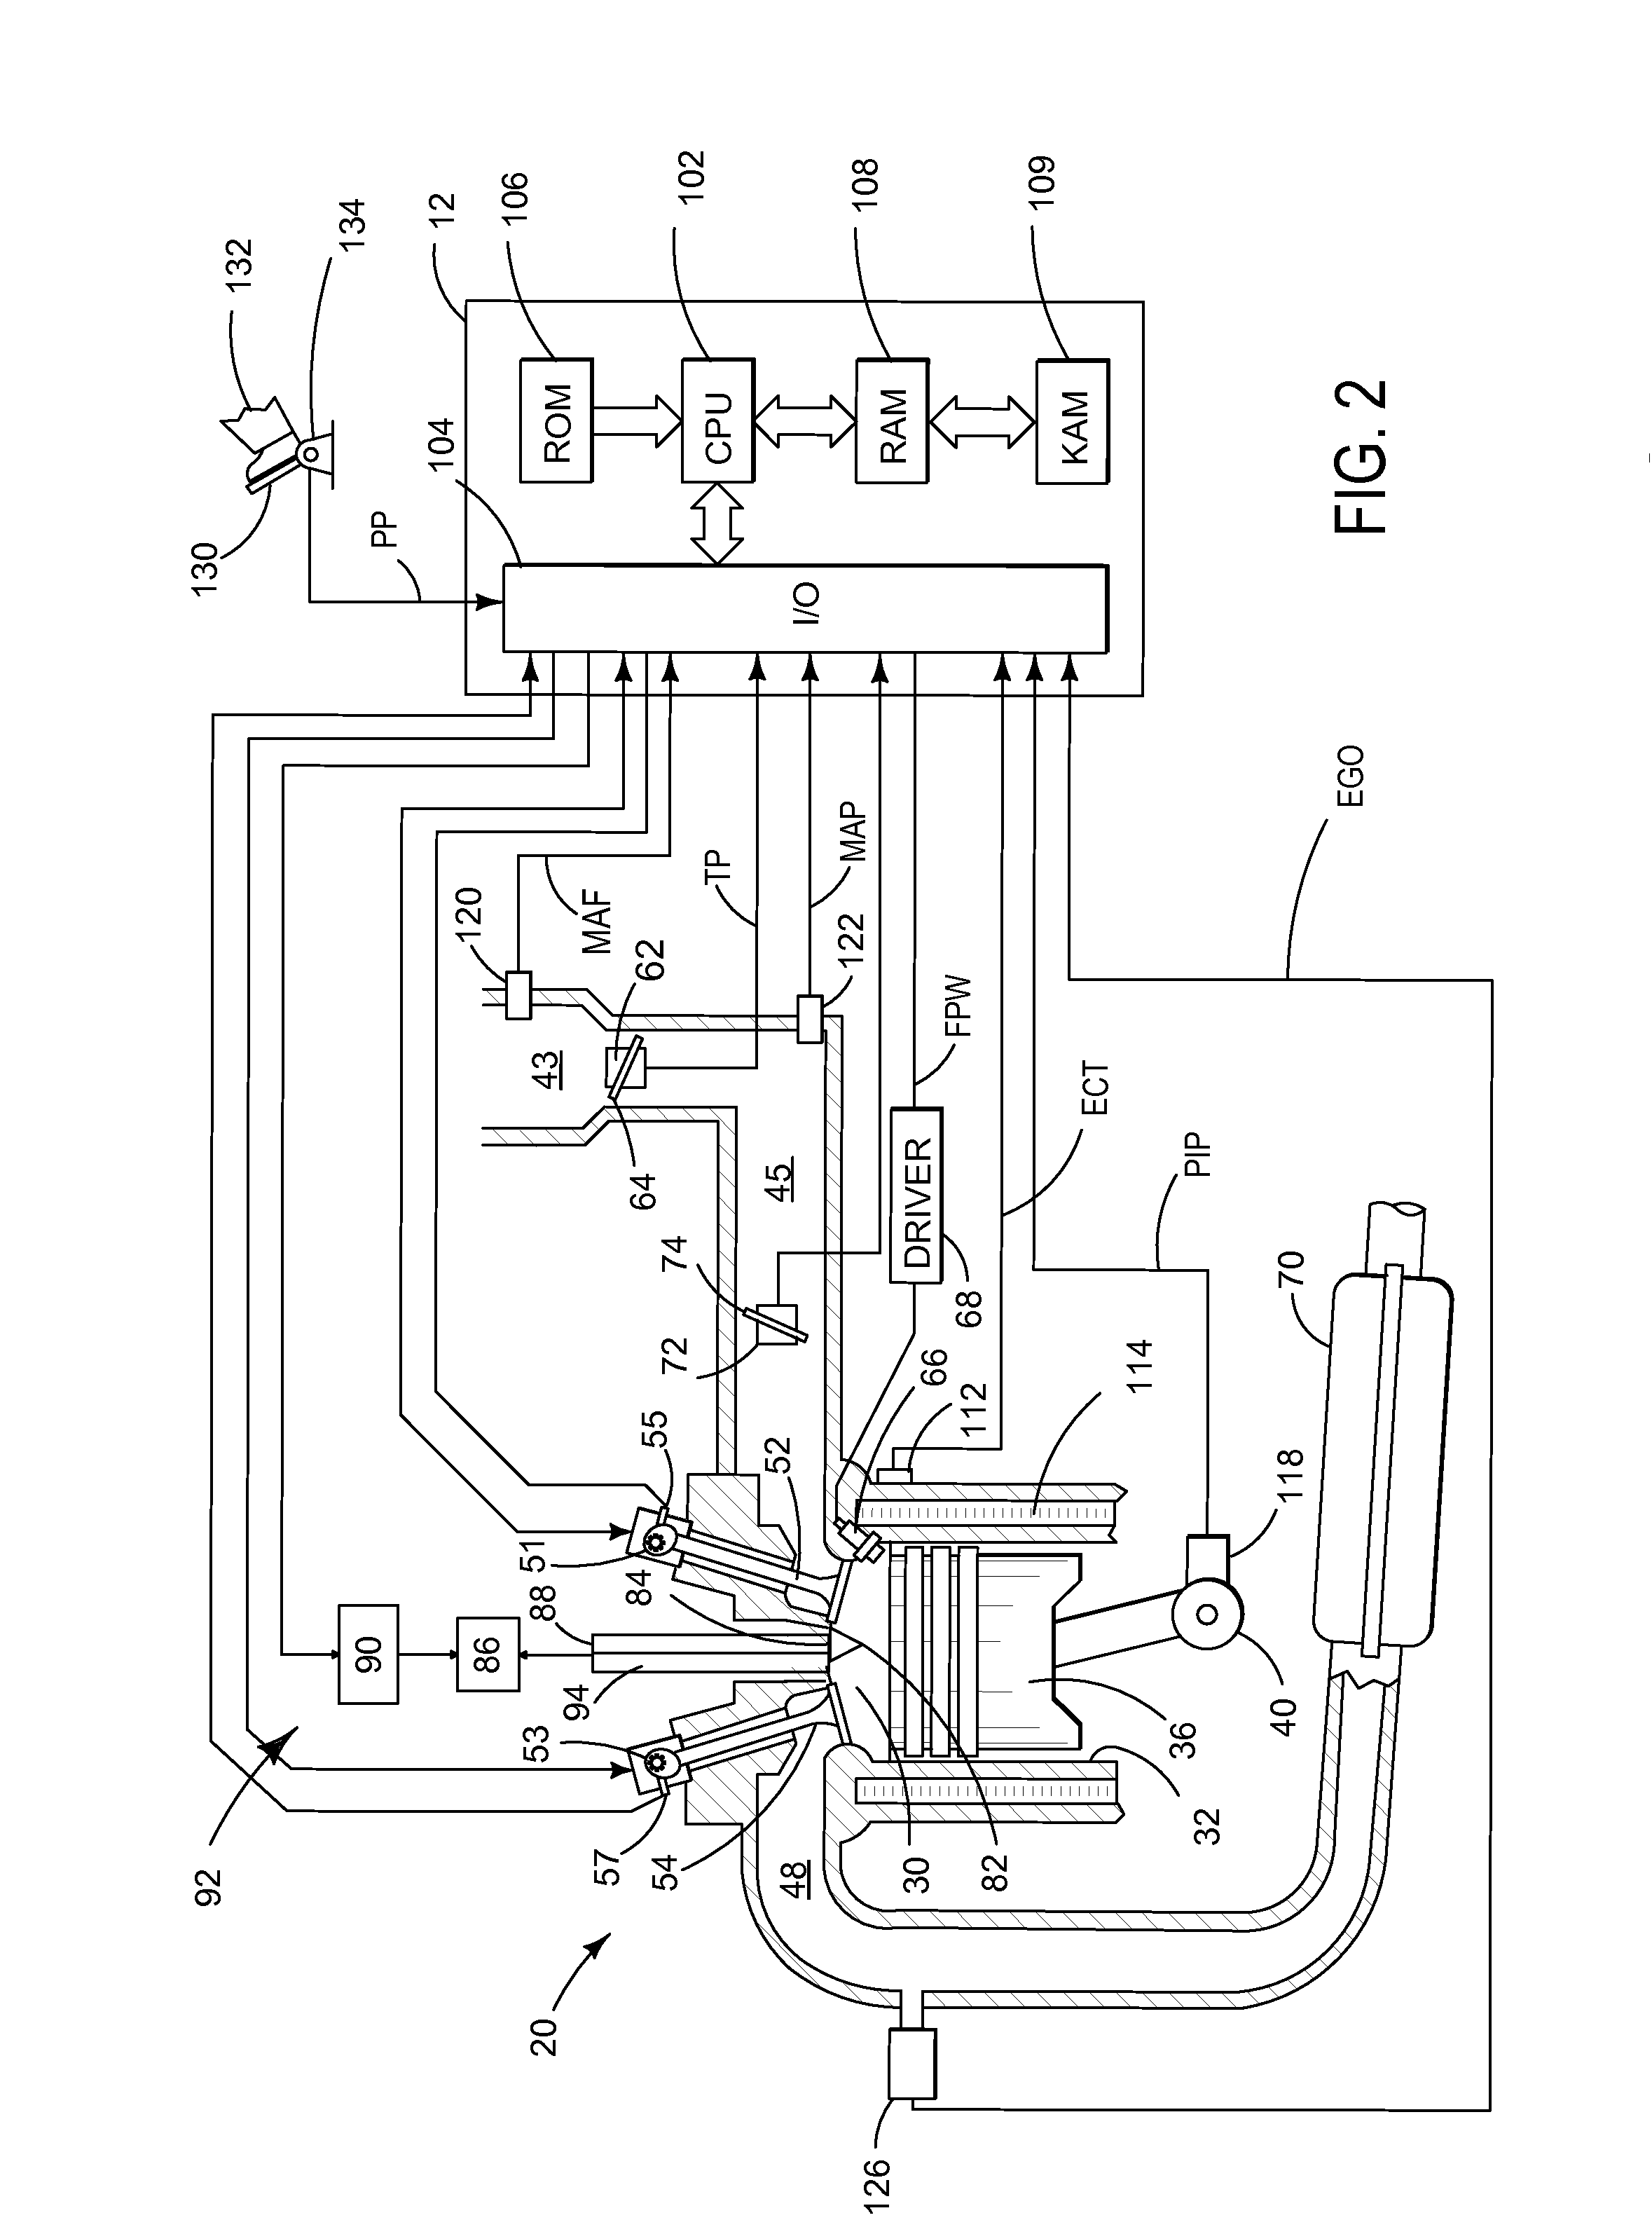 Engine with laser ignition and measurement